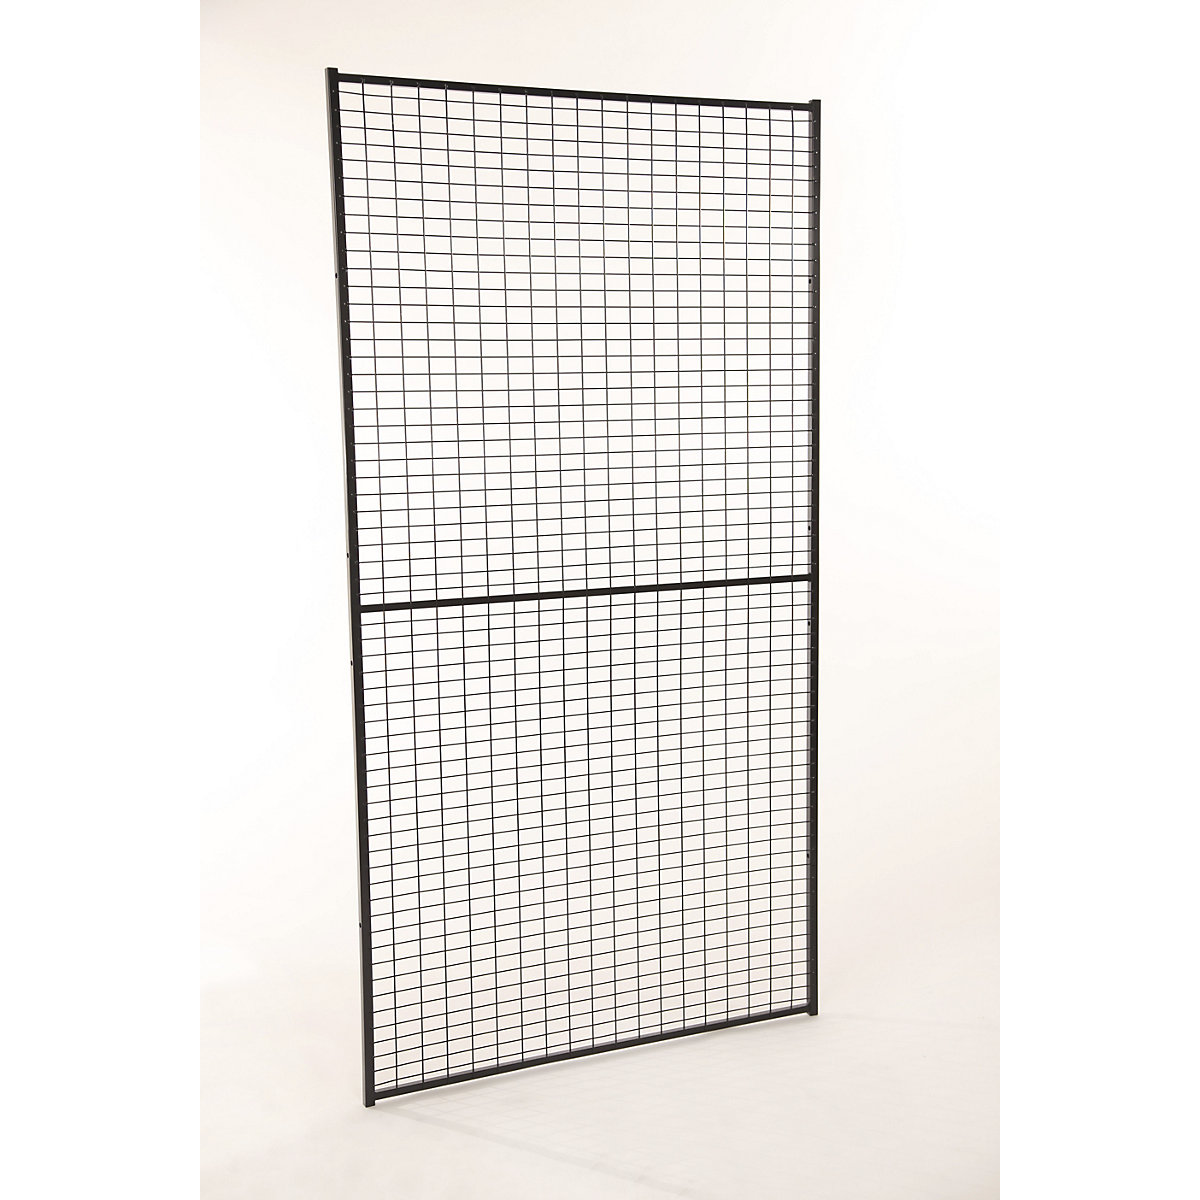 X-GUARD LITE machine protective fencing, wall section – Axelent, height 1900 mm, width 600 mm-11